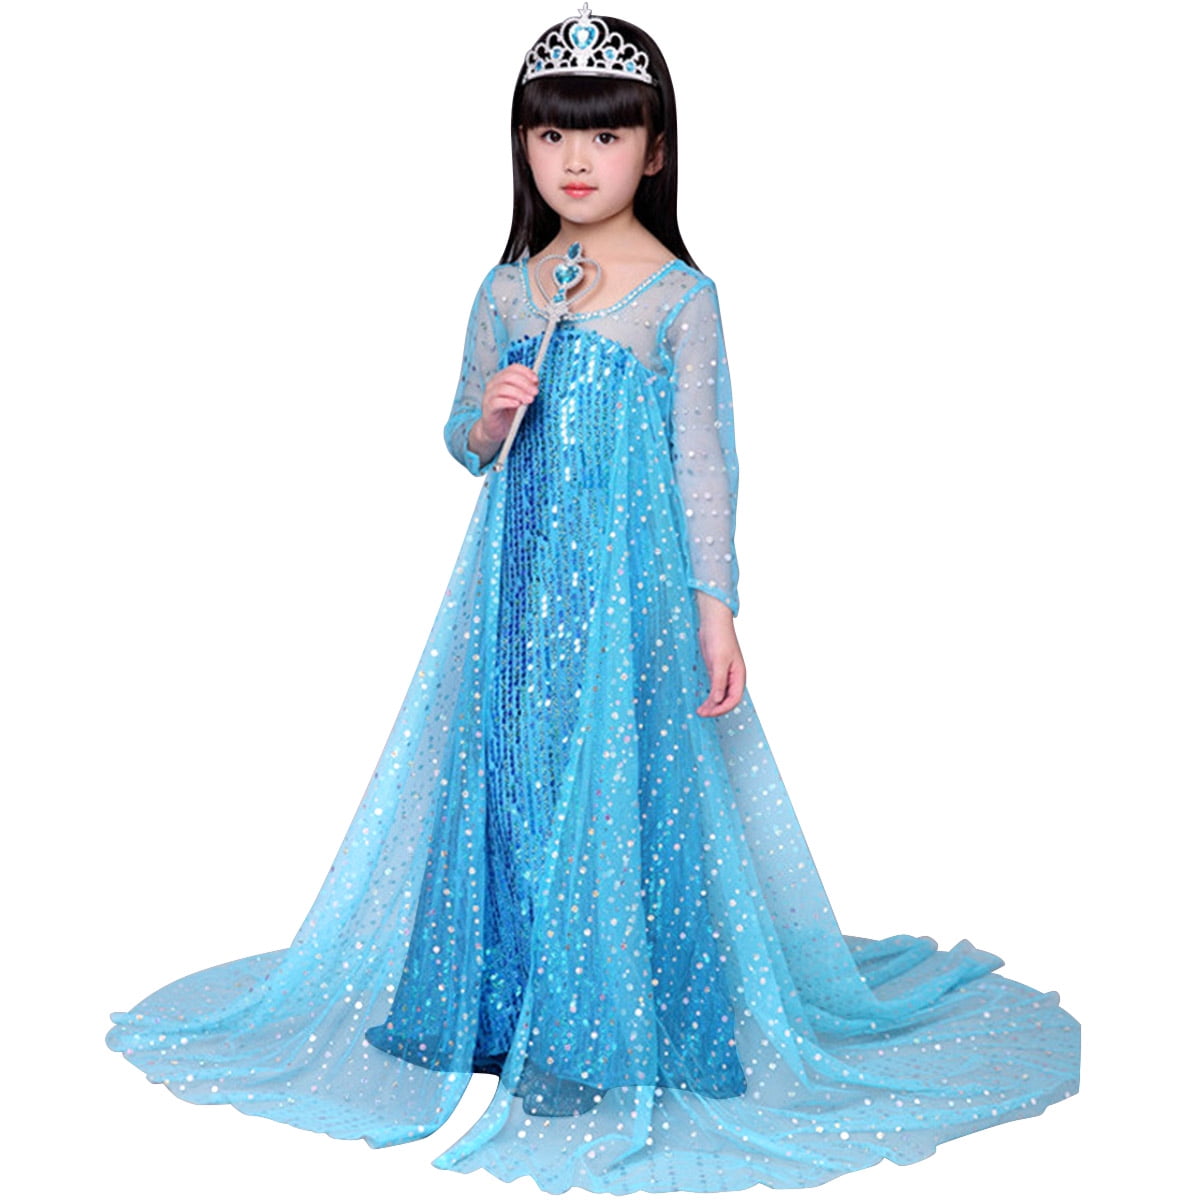 AmzBarley Girls Princess Dress for Child Dressing up Costume Kids Fancy Party Outfit Birthday Cosplay Dresses